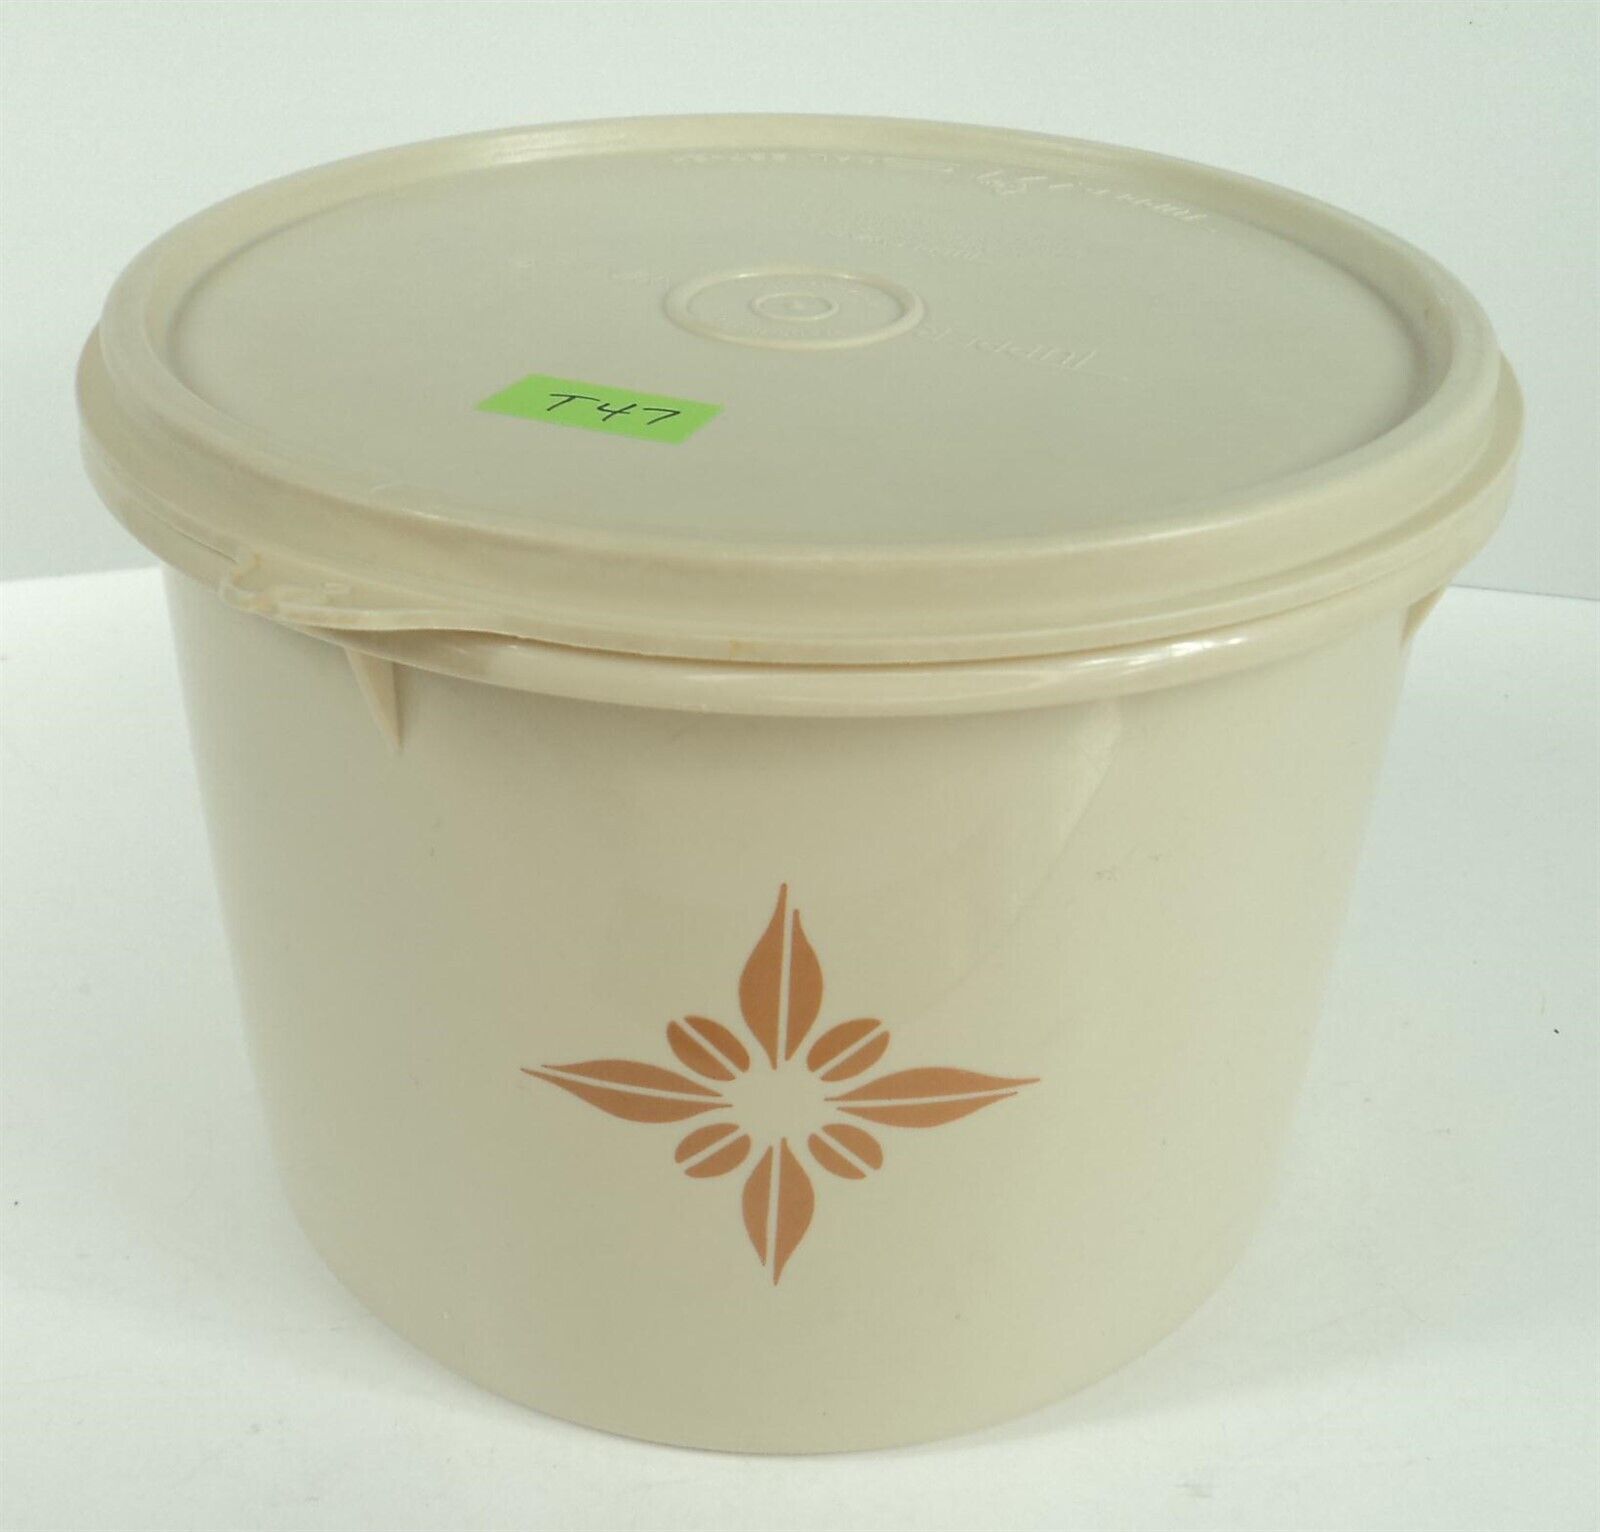 Primary image for T47 Tupperware Starburst Canister 2 Piece Round Almond Container w/ Lid